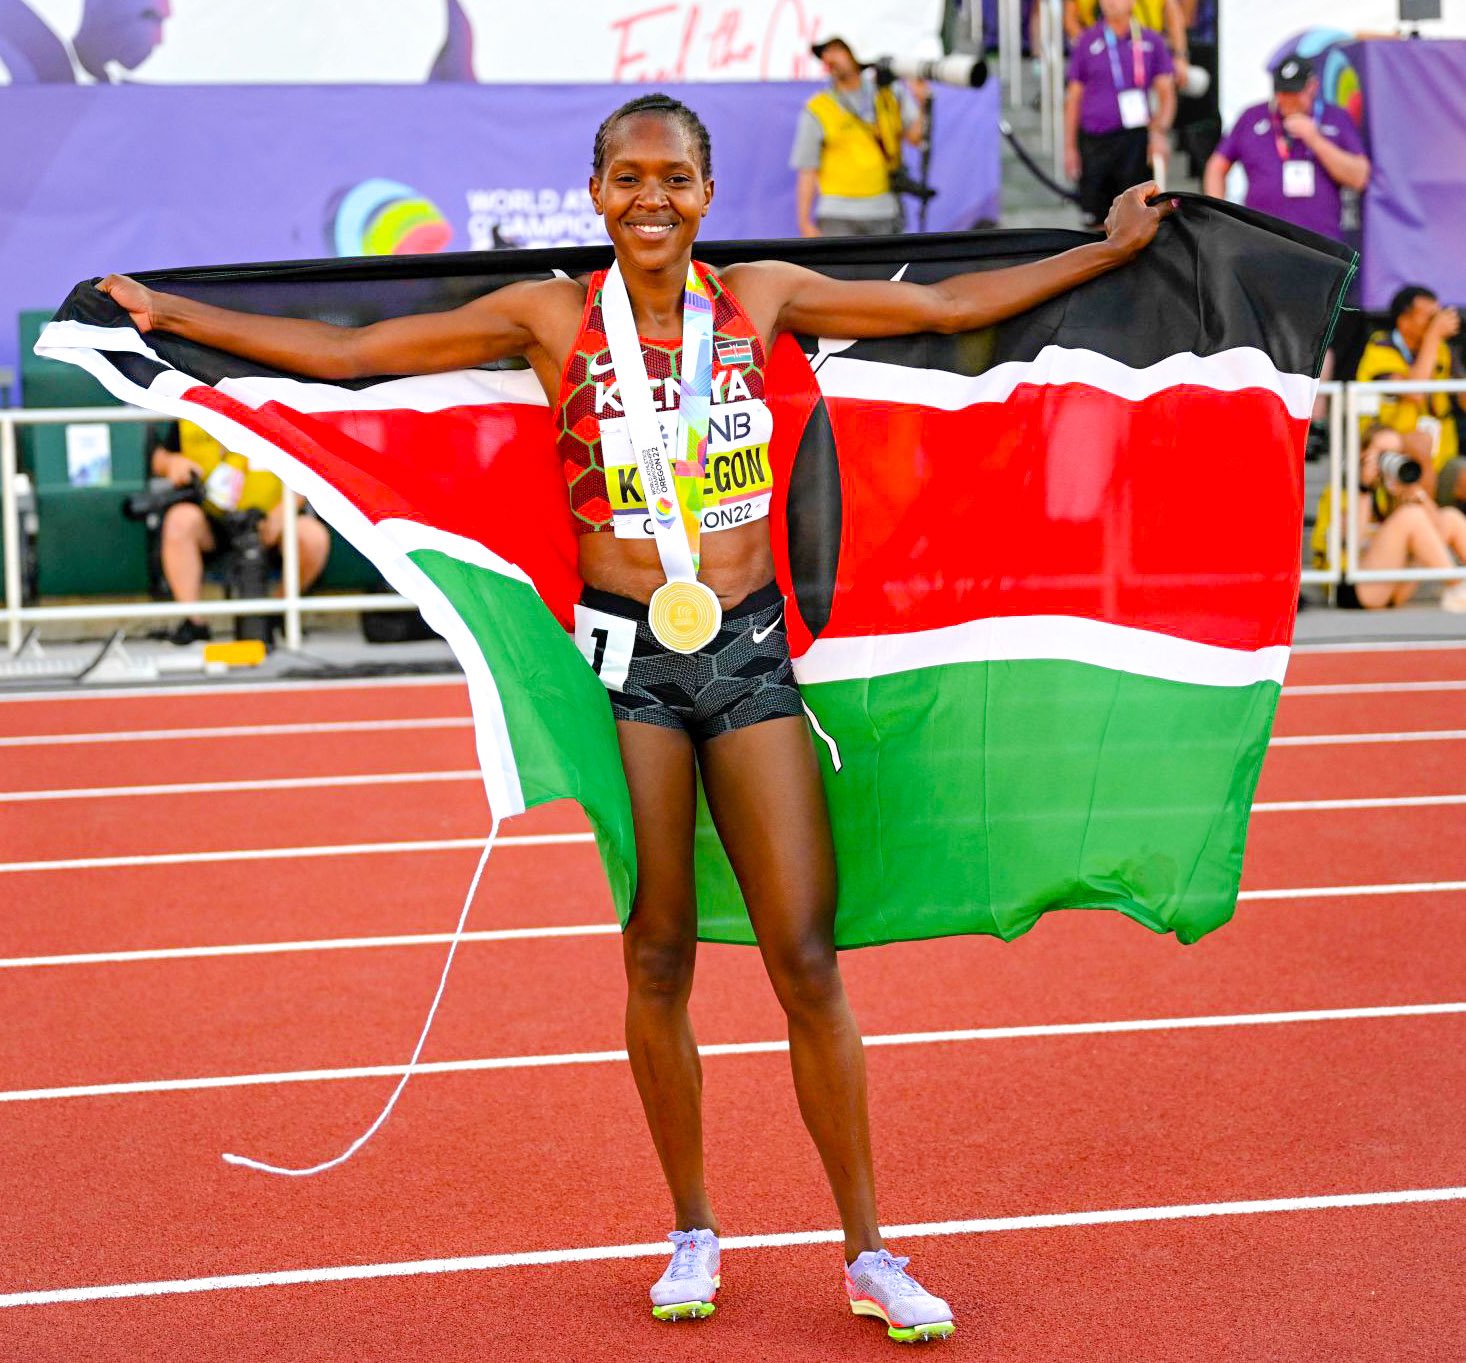 Faith Kipyegon wins first gold medal for Kenya in the World Championships in Oregon, USA.